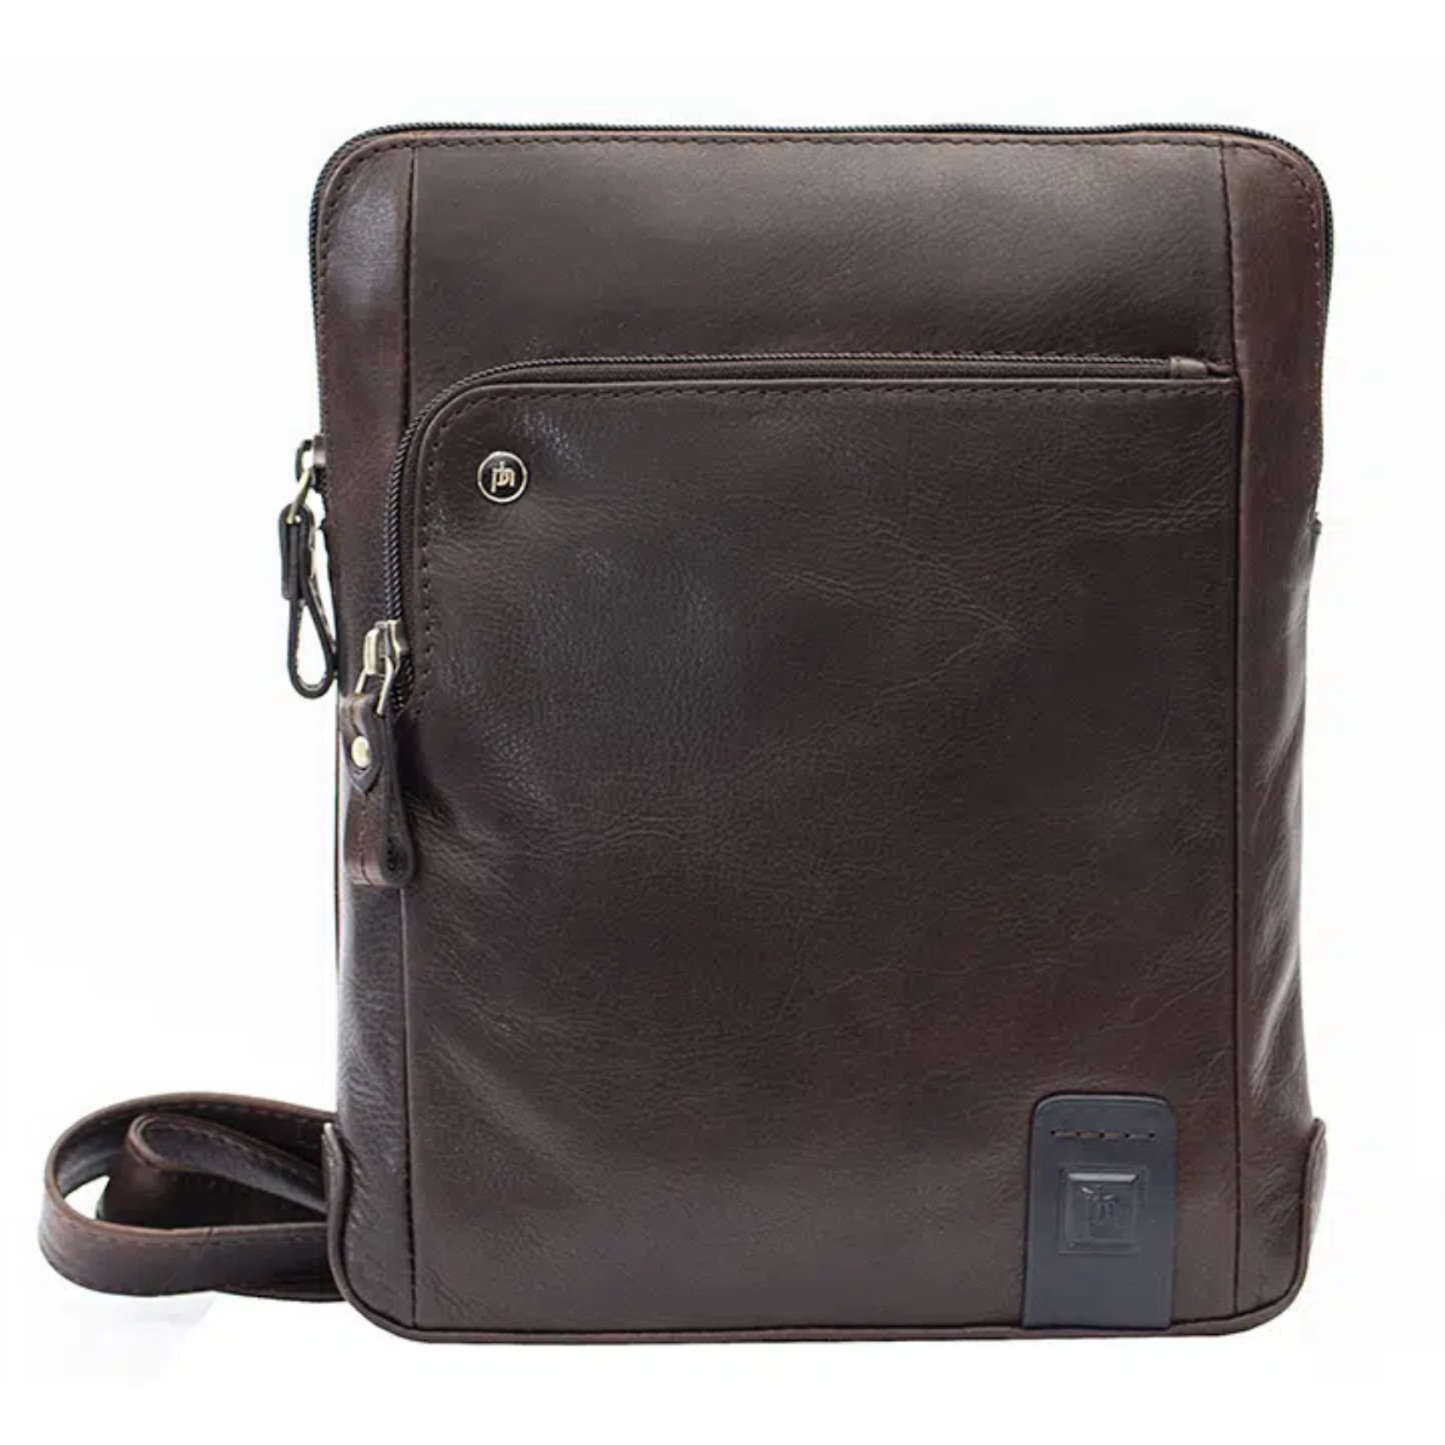 Load image into Gallery viewer, Men’s Leather Crossbody Bag - Tuscan Leather Bag MyExquisite...
